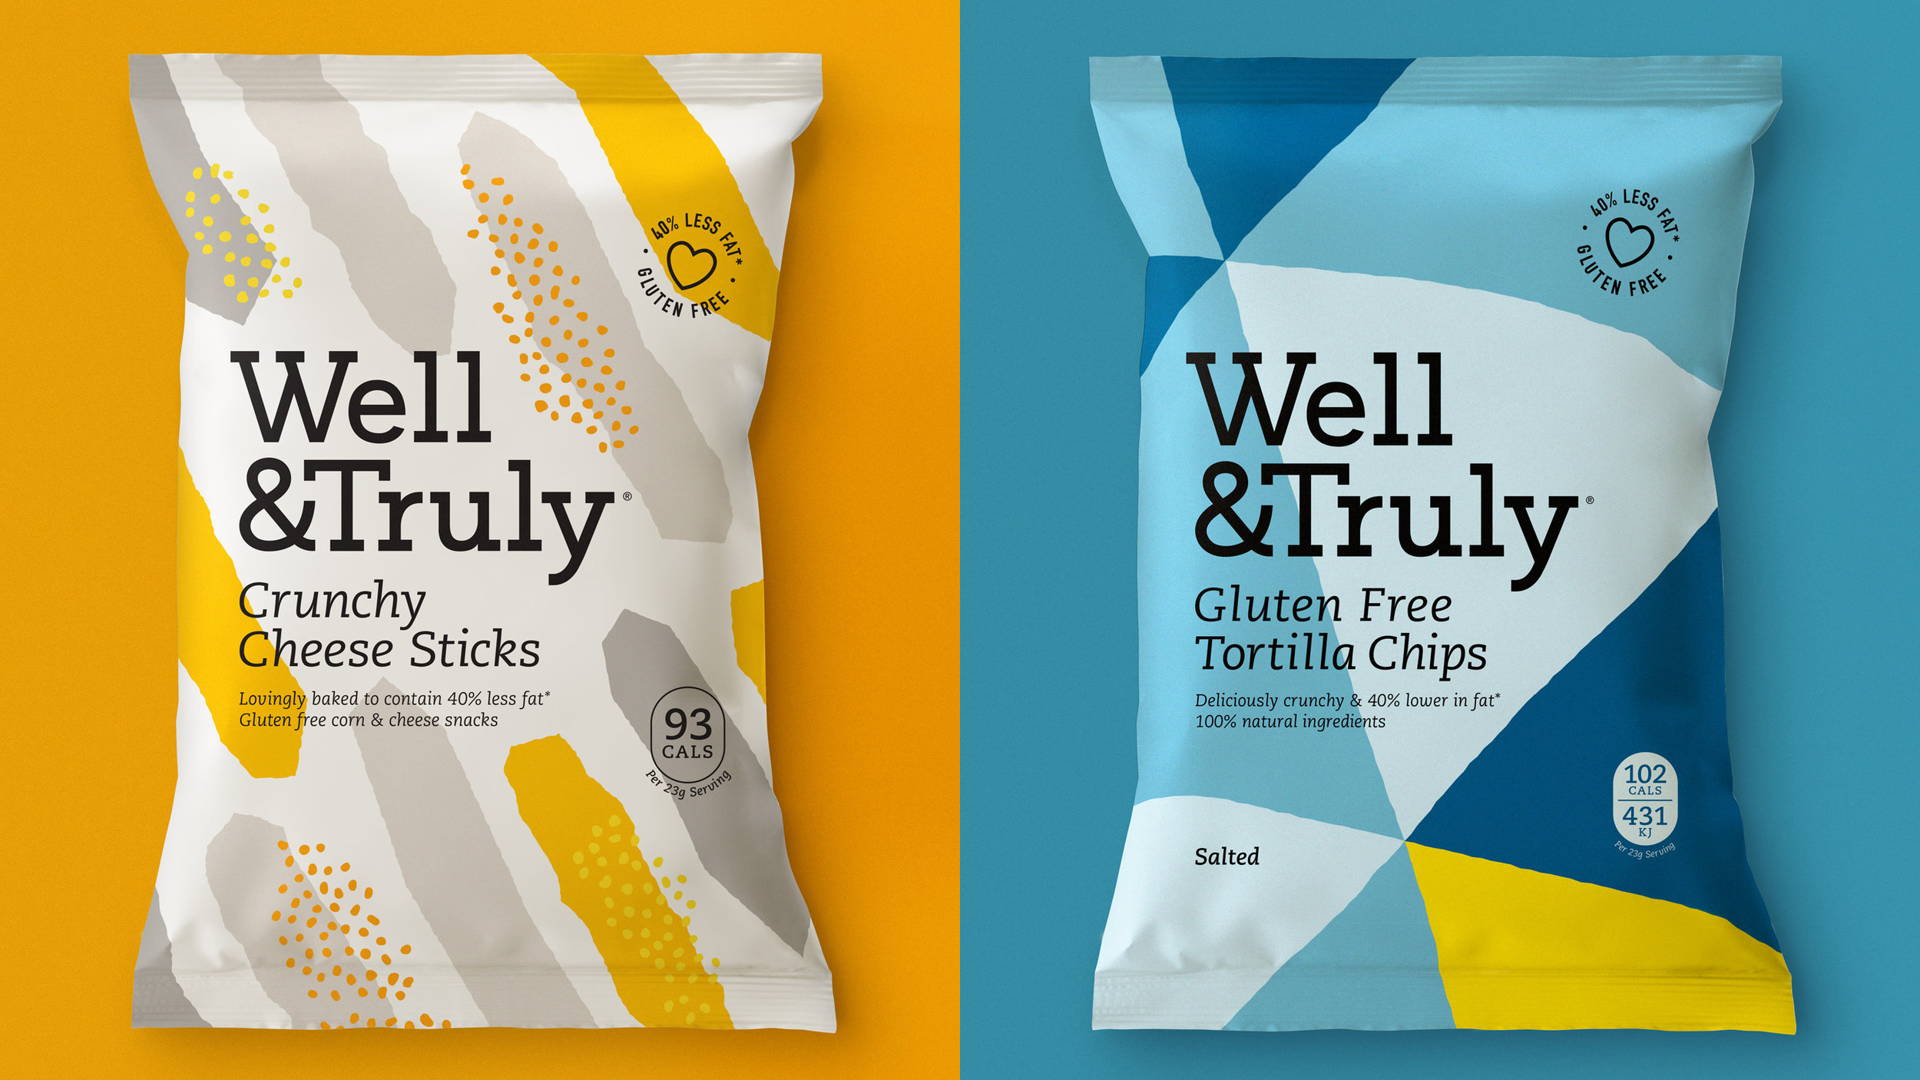 Featured image for Well & Truly is Here To Change Up The Healthy Snack Market With Colorful Packaging